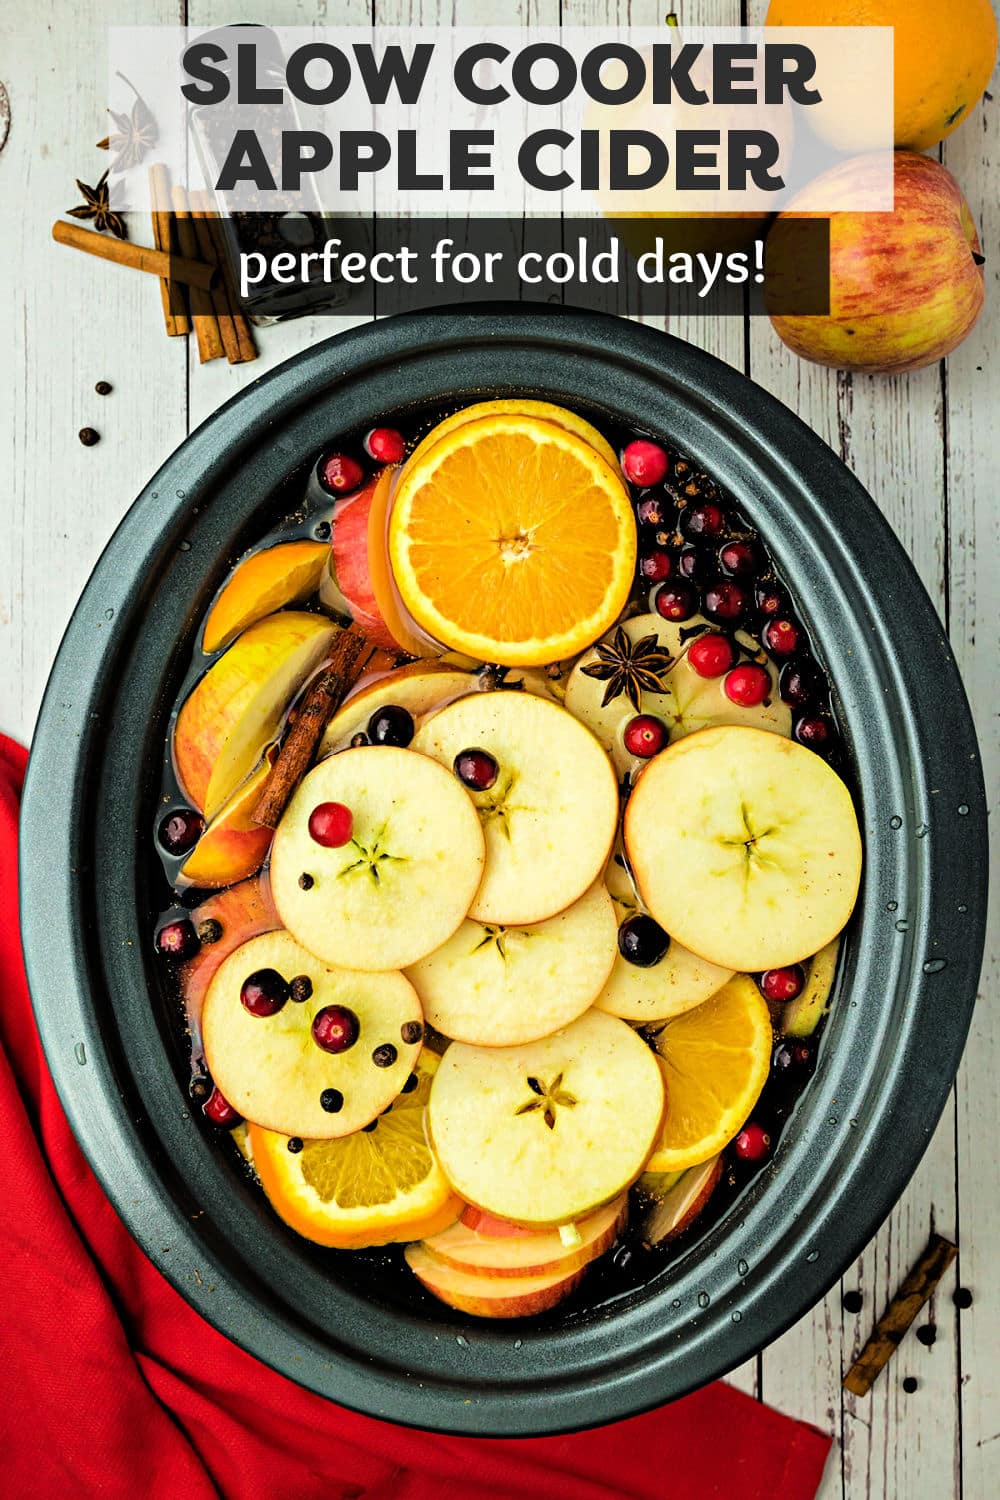 Warm and cozy Slow Cooker Apple Cider is fruity, full of spices, and slow cooked to perfection in the crockpot. Grab a blanket or your favorite sweater and snuggle up with a cup! | www.persnicketyplates.com